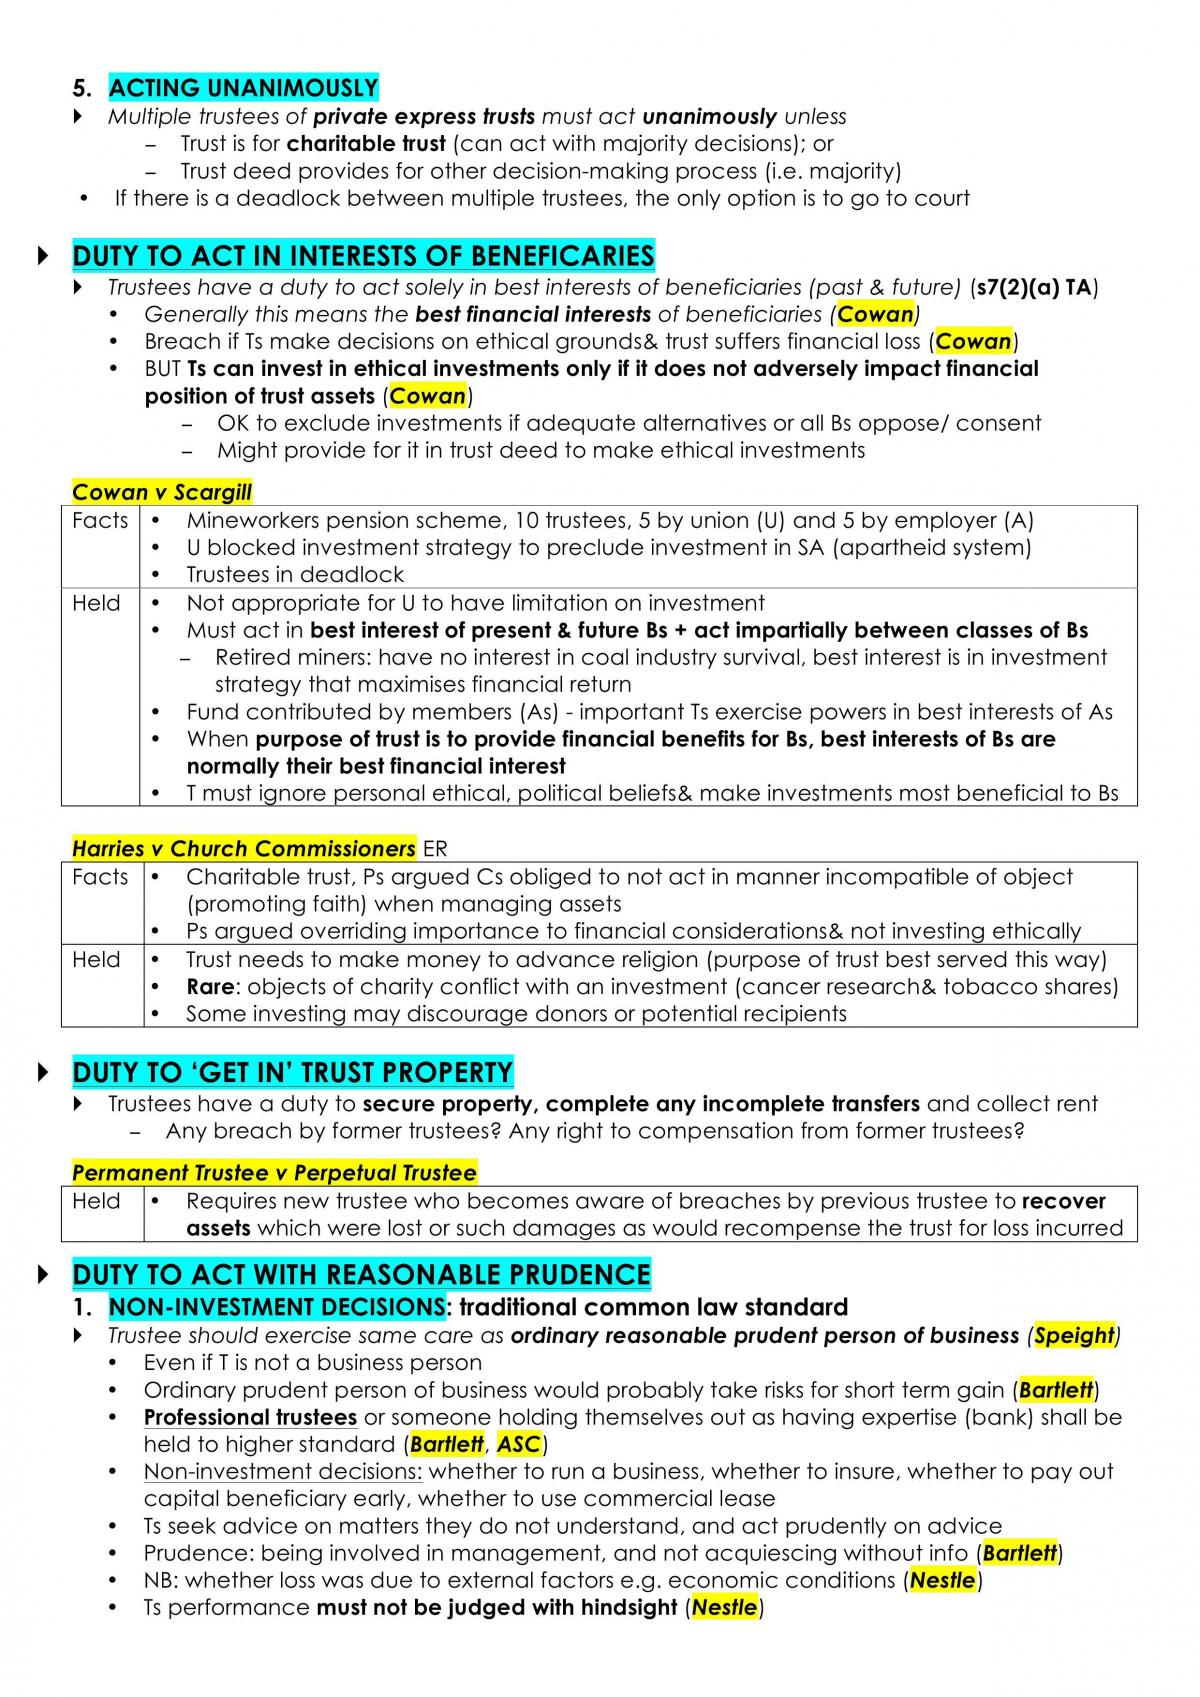 HD LAW4170 Full Exam Notes - Page 32